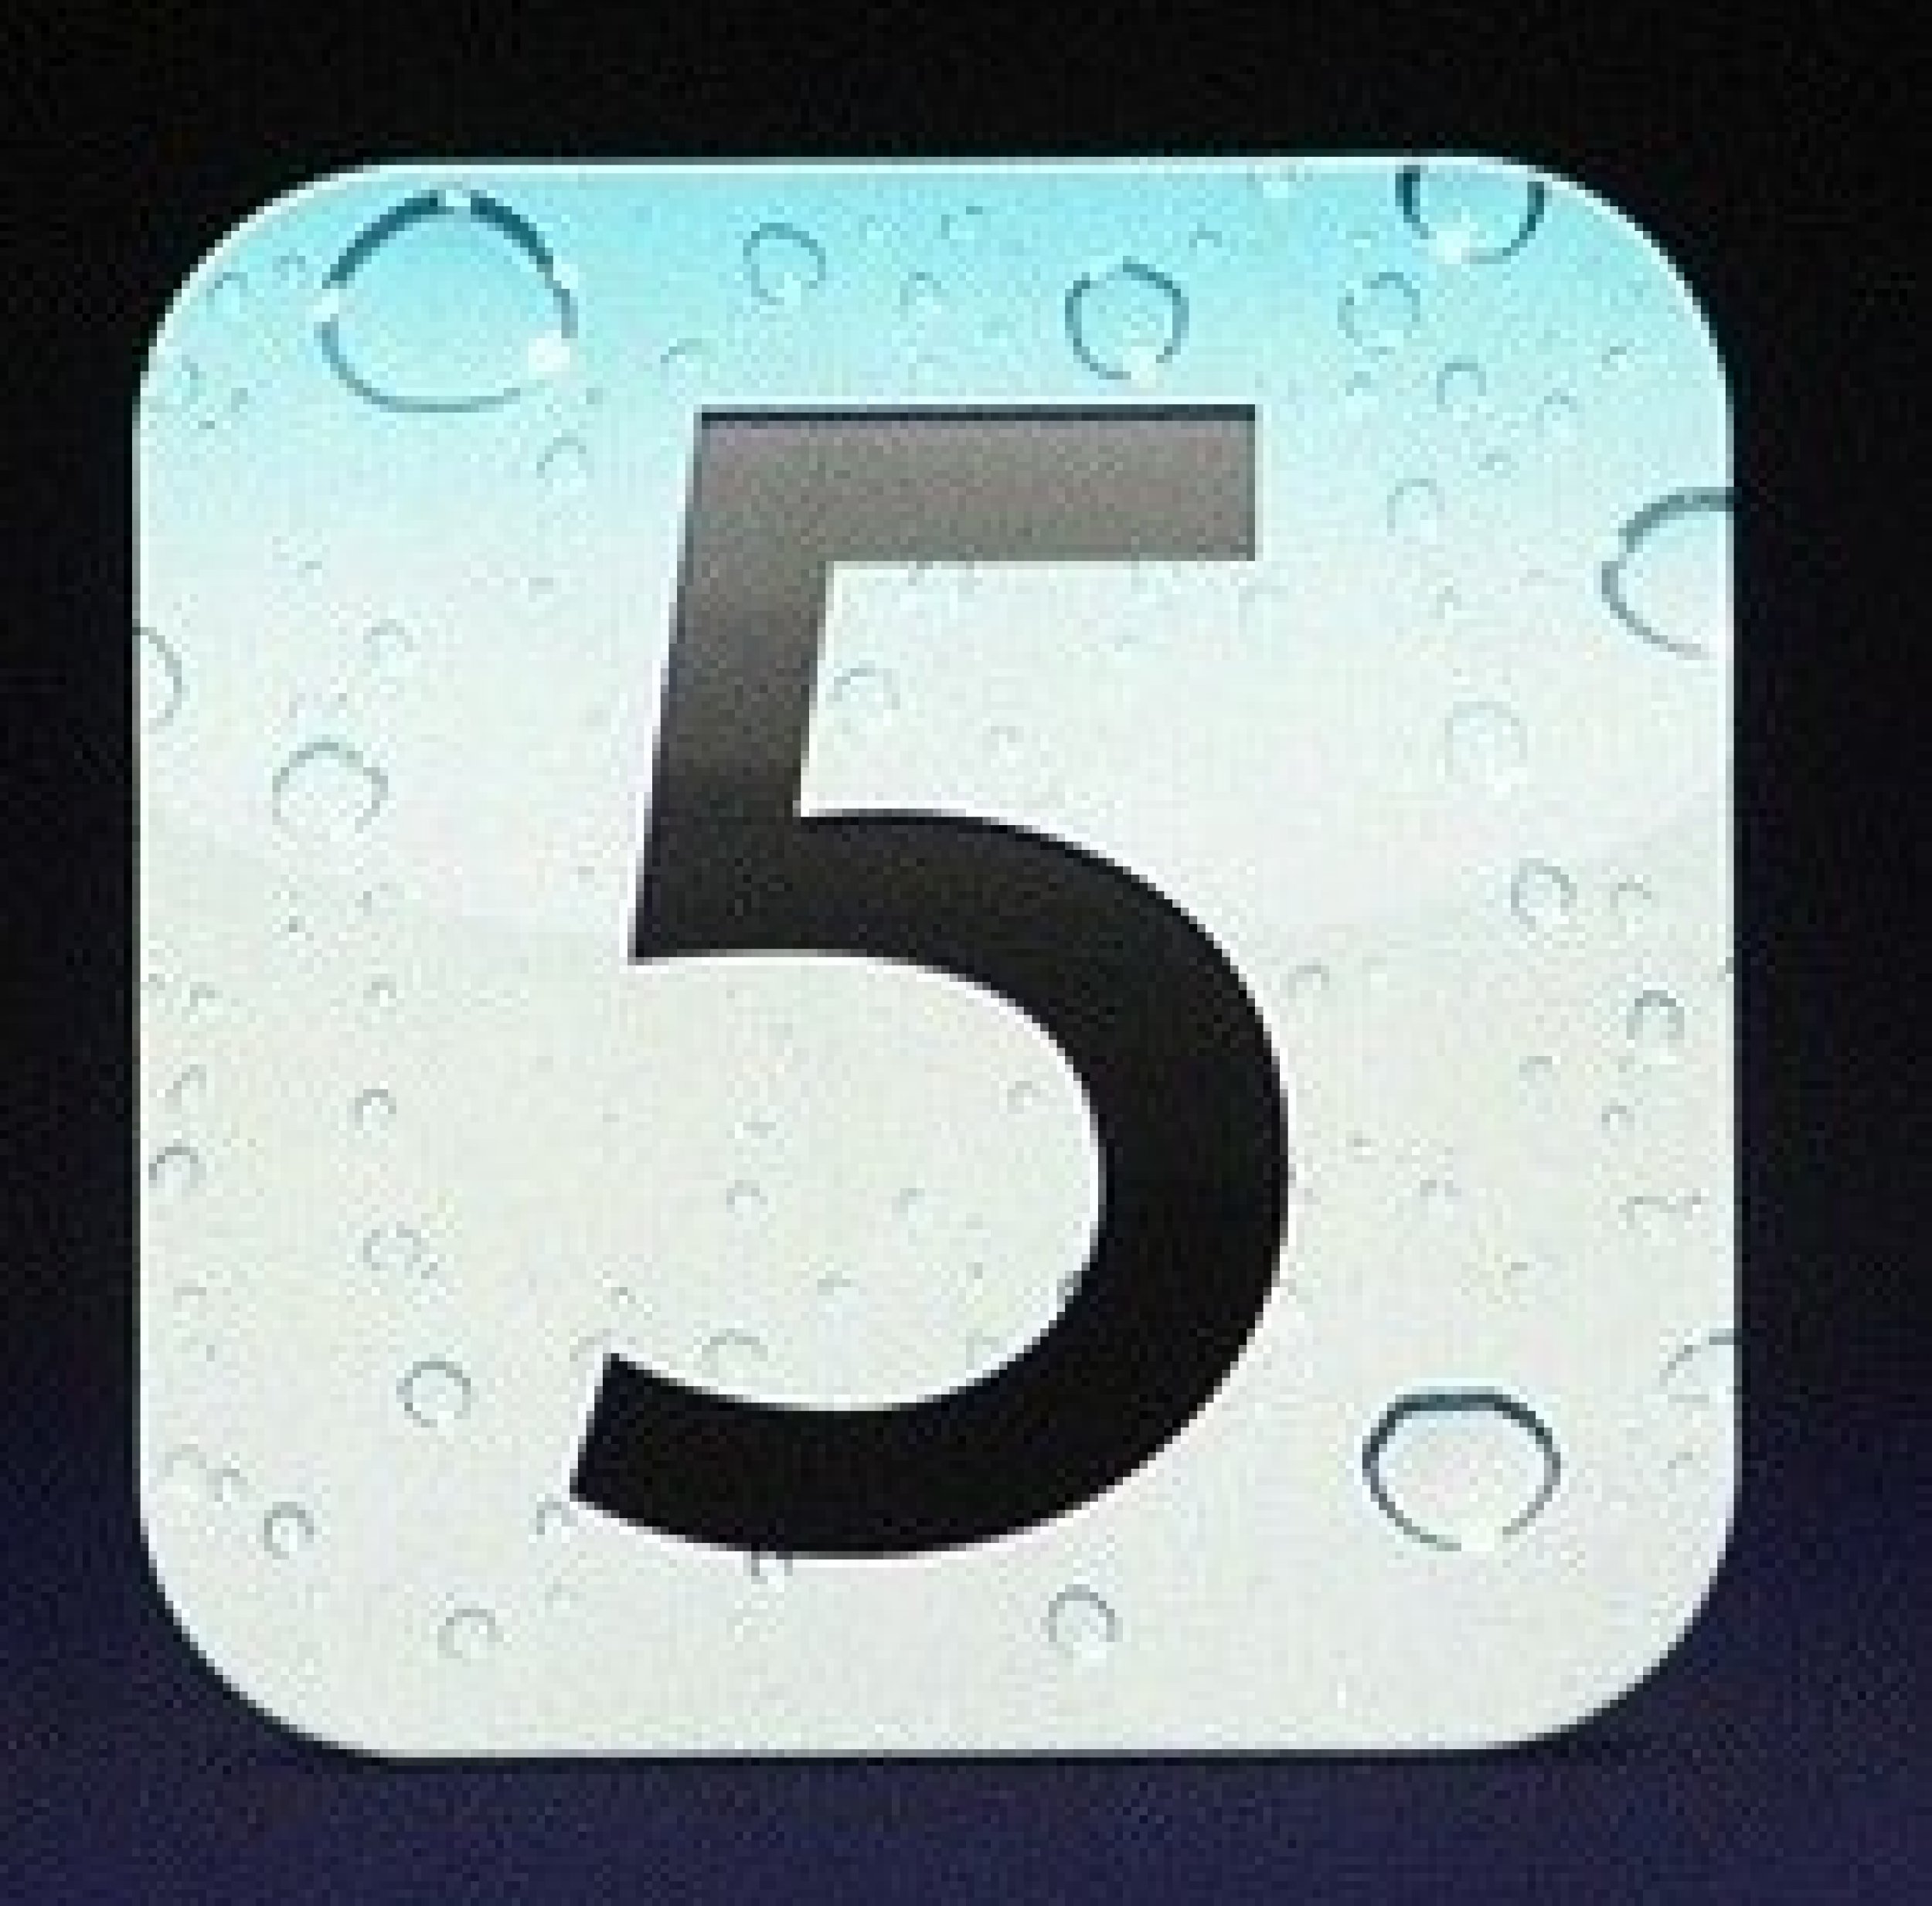 iOS 5 is a free update for the iPhone, iPad, and iPod Touch. With 200 new features, its Apples most extensive system upgrade yet.